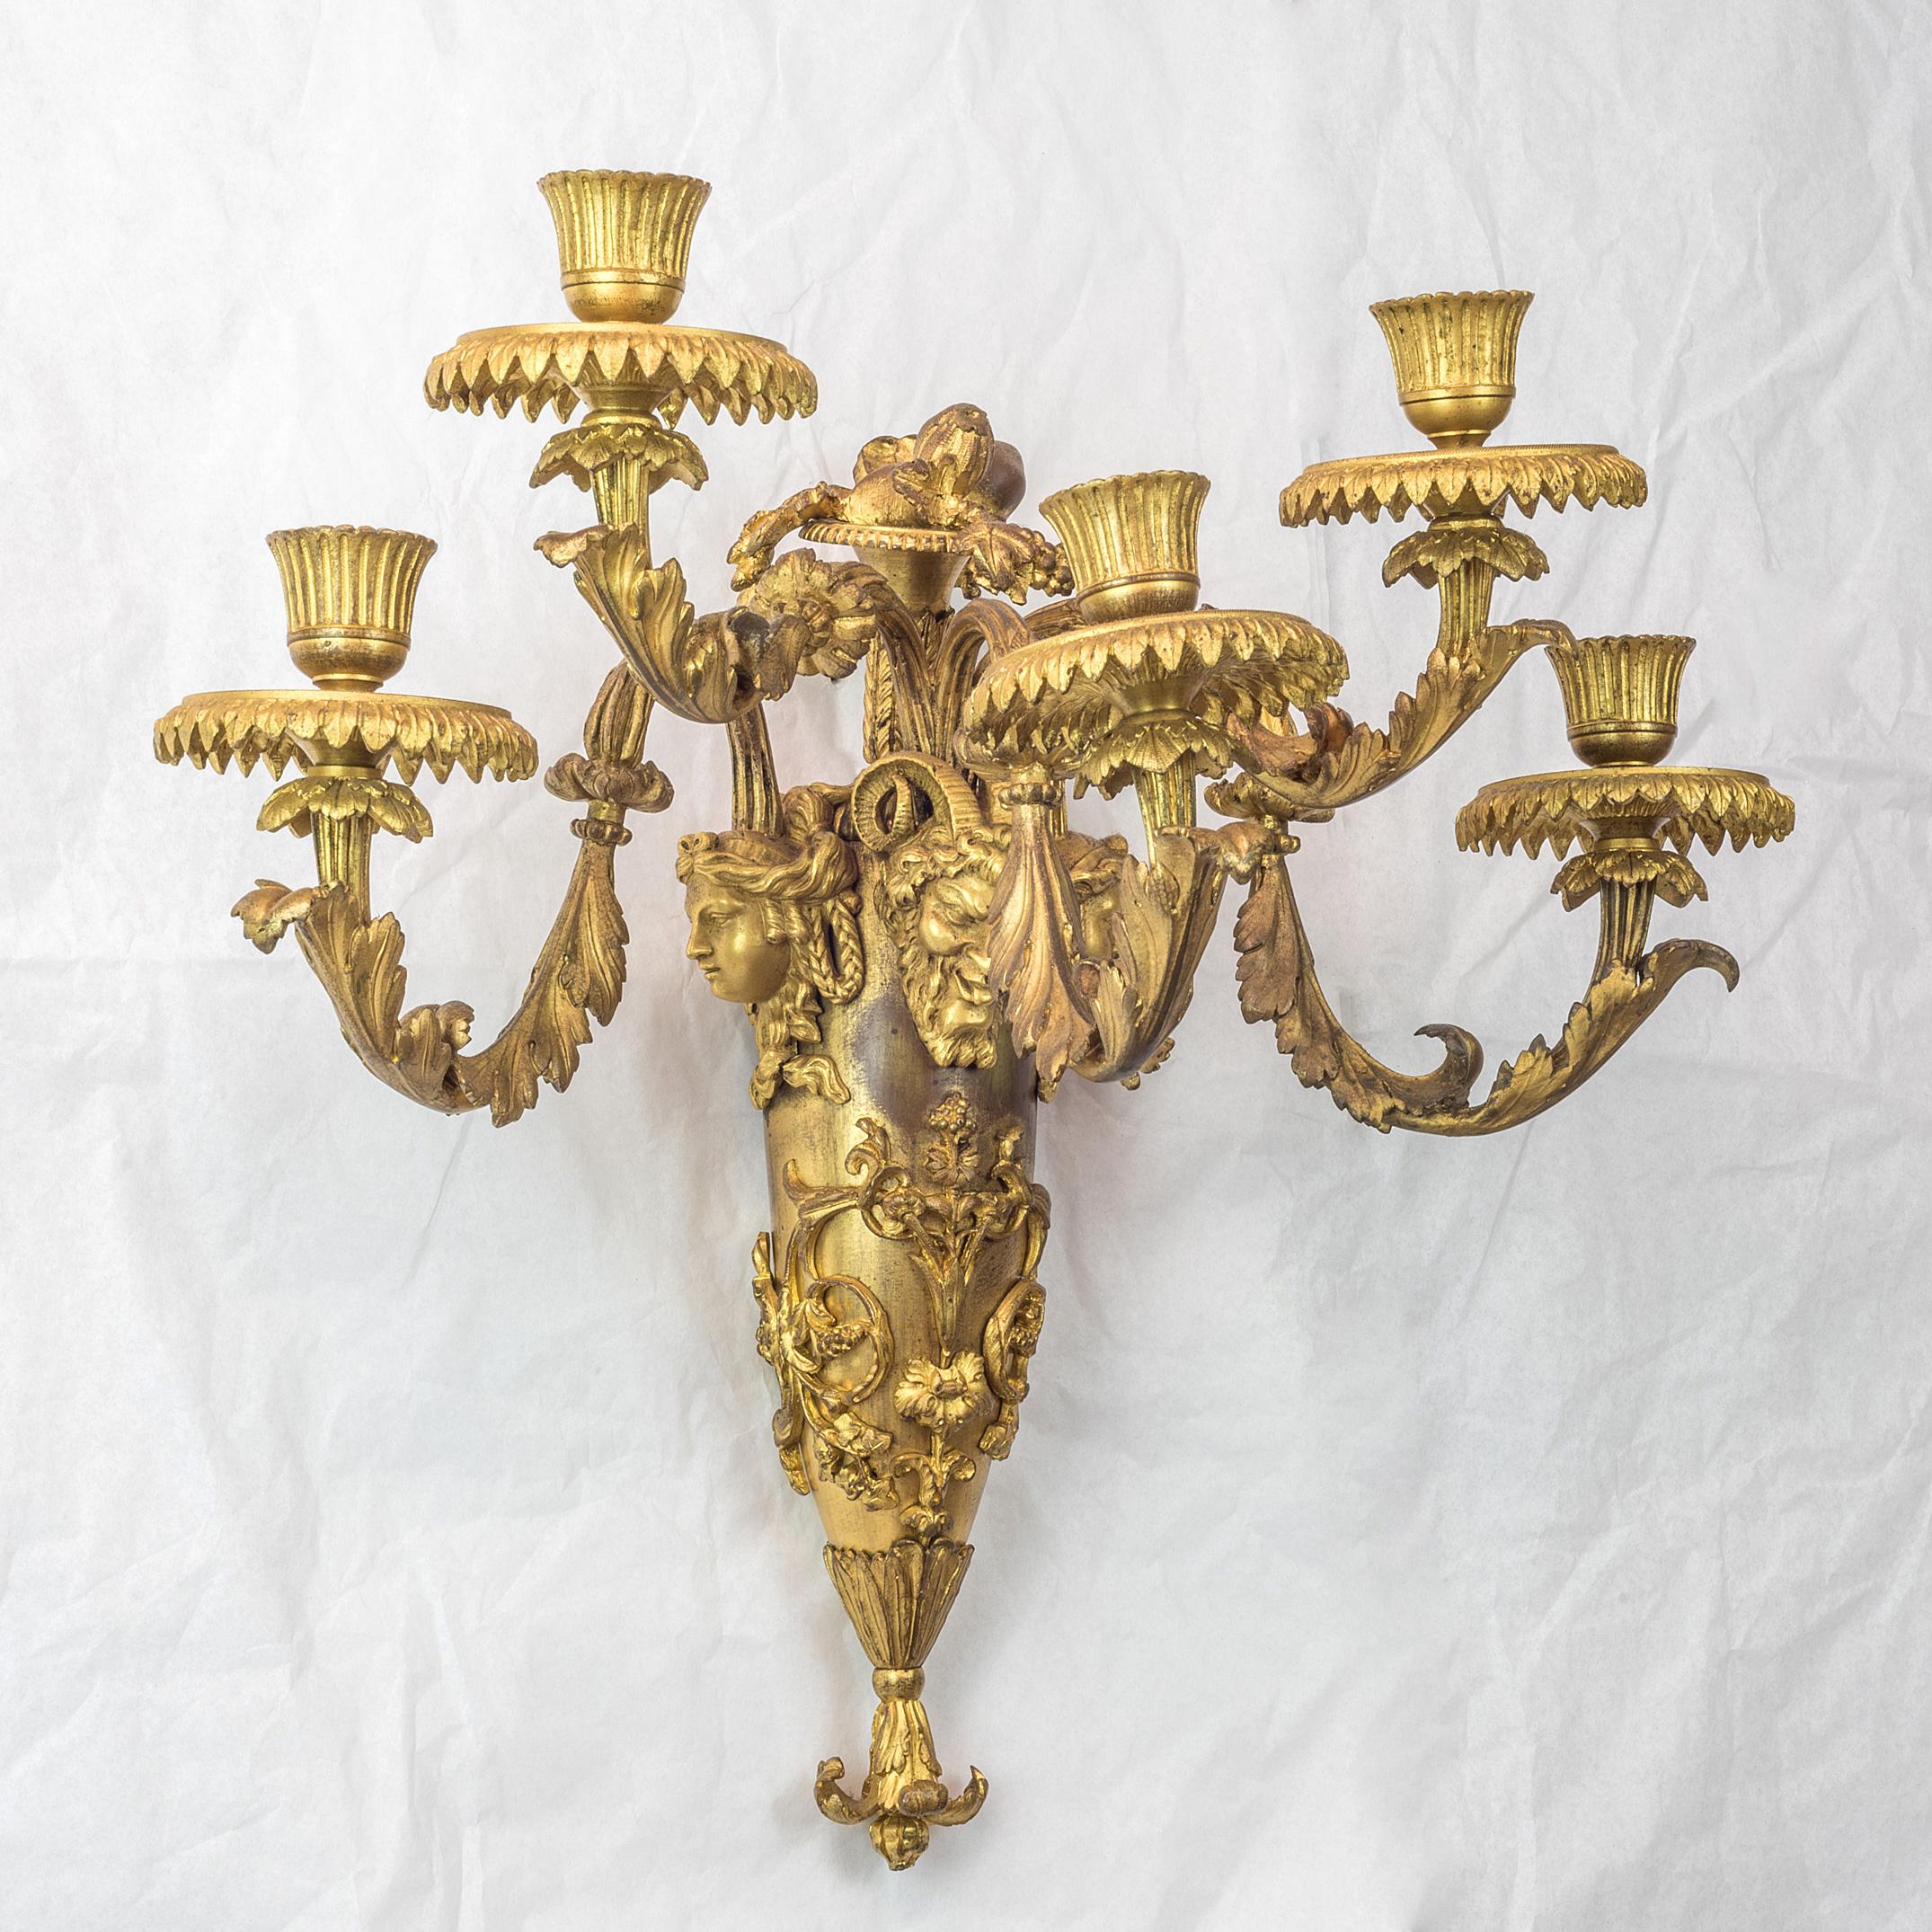 A fantastic pair of French Louis XVI style gilt bronze five-light wall sconces

Each with elongated oviform standard mounted with rocaille scrolls and surmounted by a saytr mask flanked by two female masks, issuing five acanthus scrolled candle